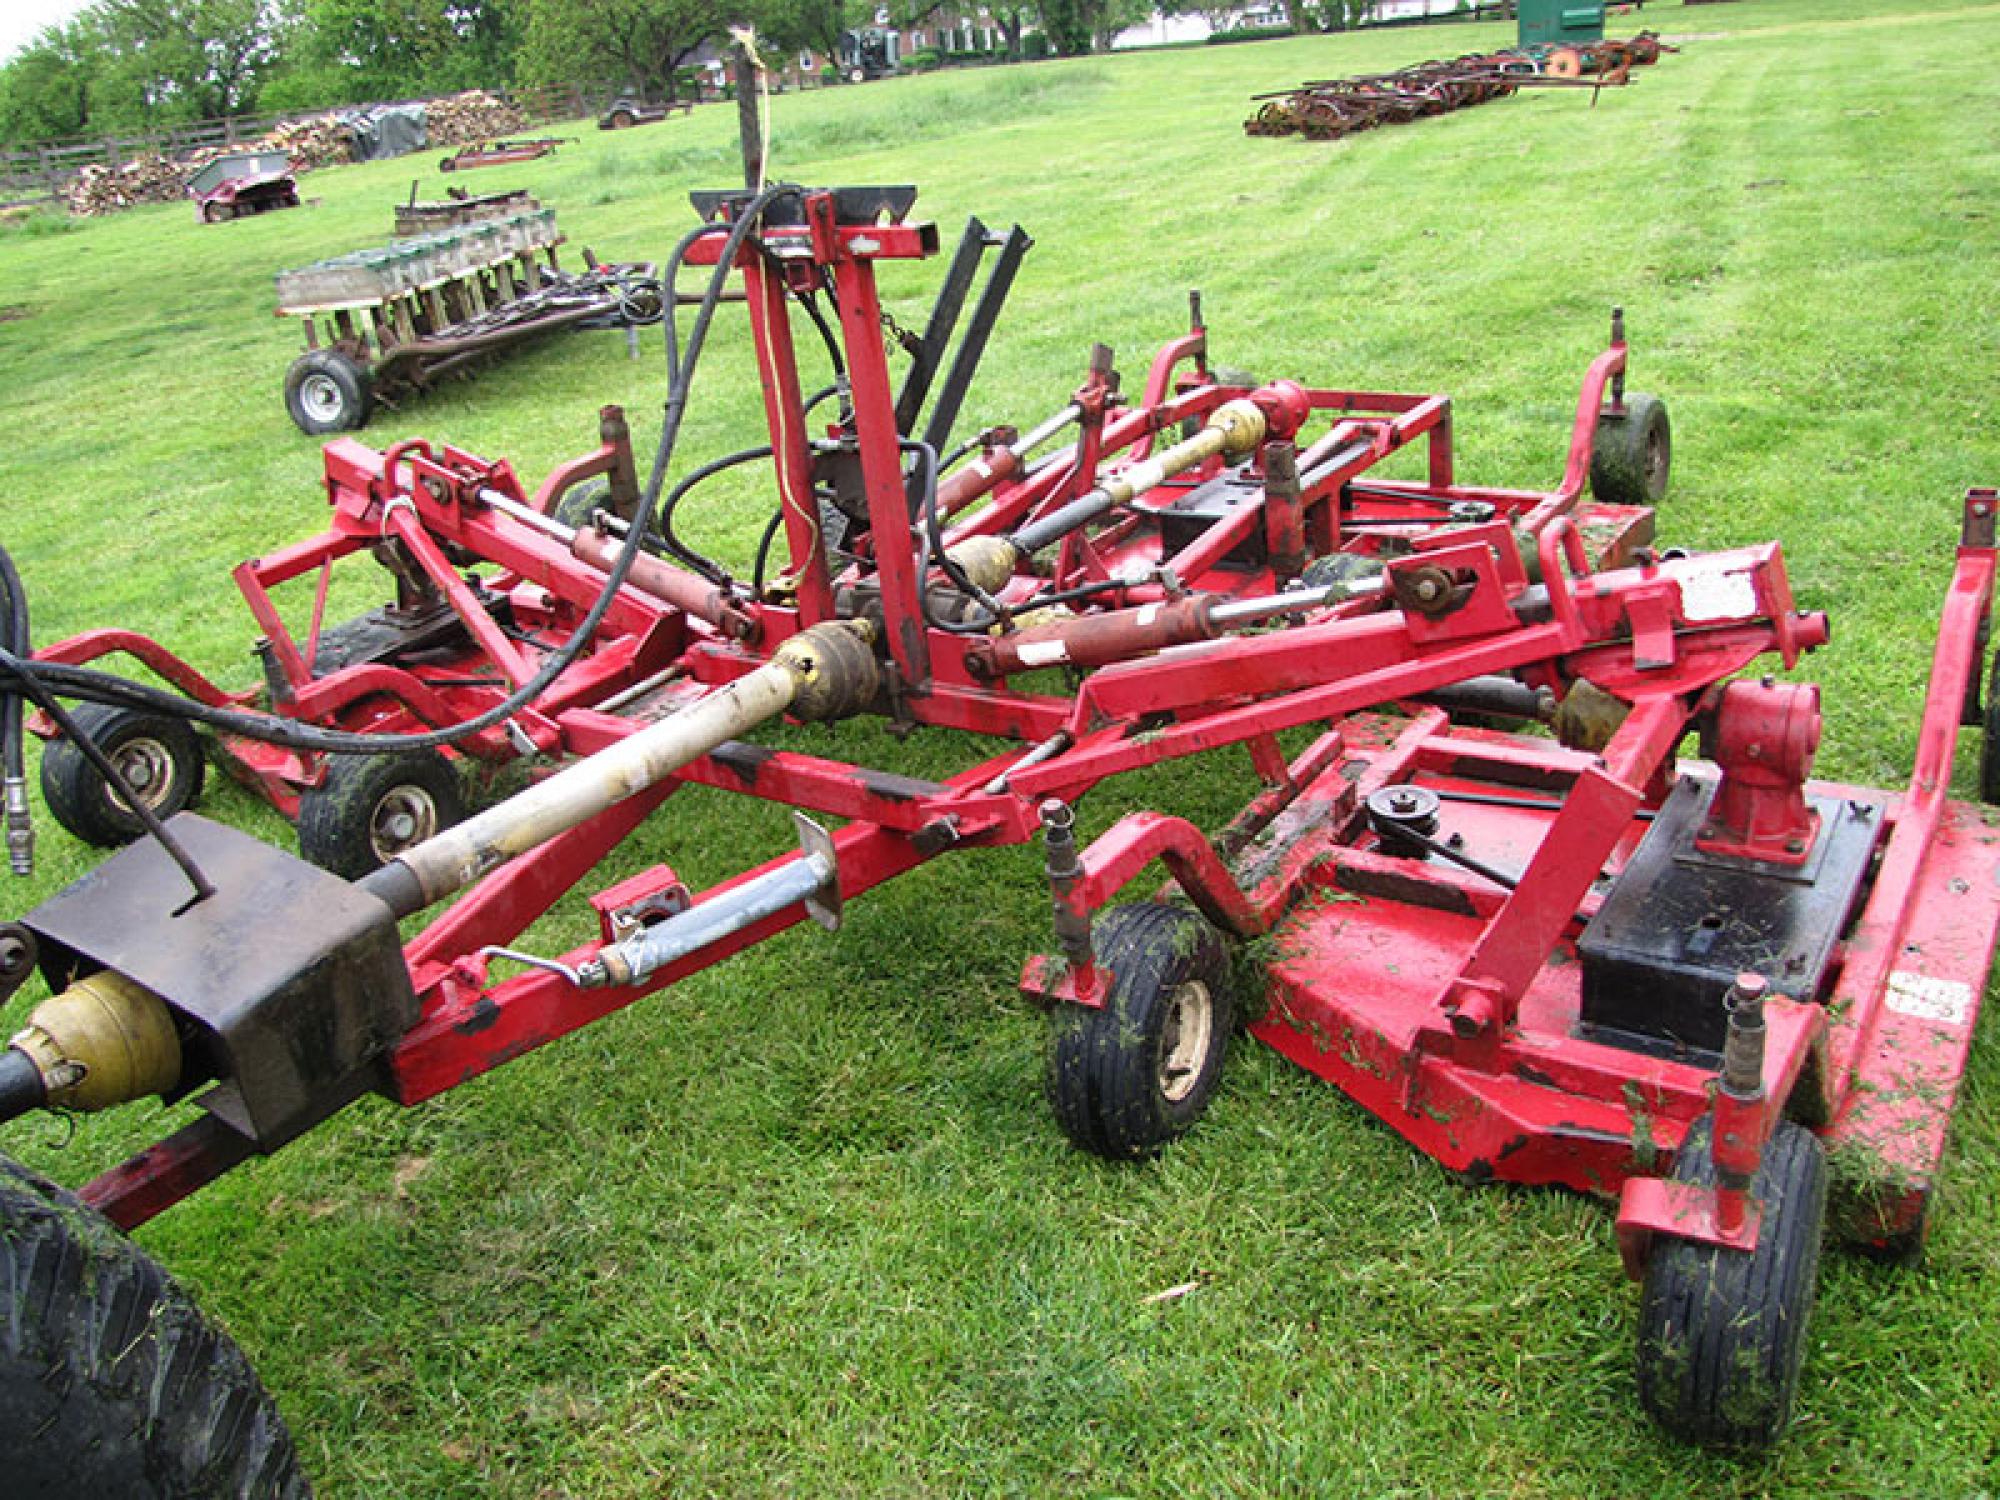 Turf Maintenance & Golf Course Equipment Auction | The Wendt Group, Inc ...